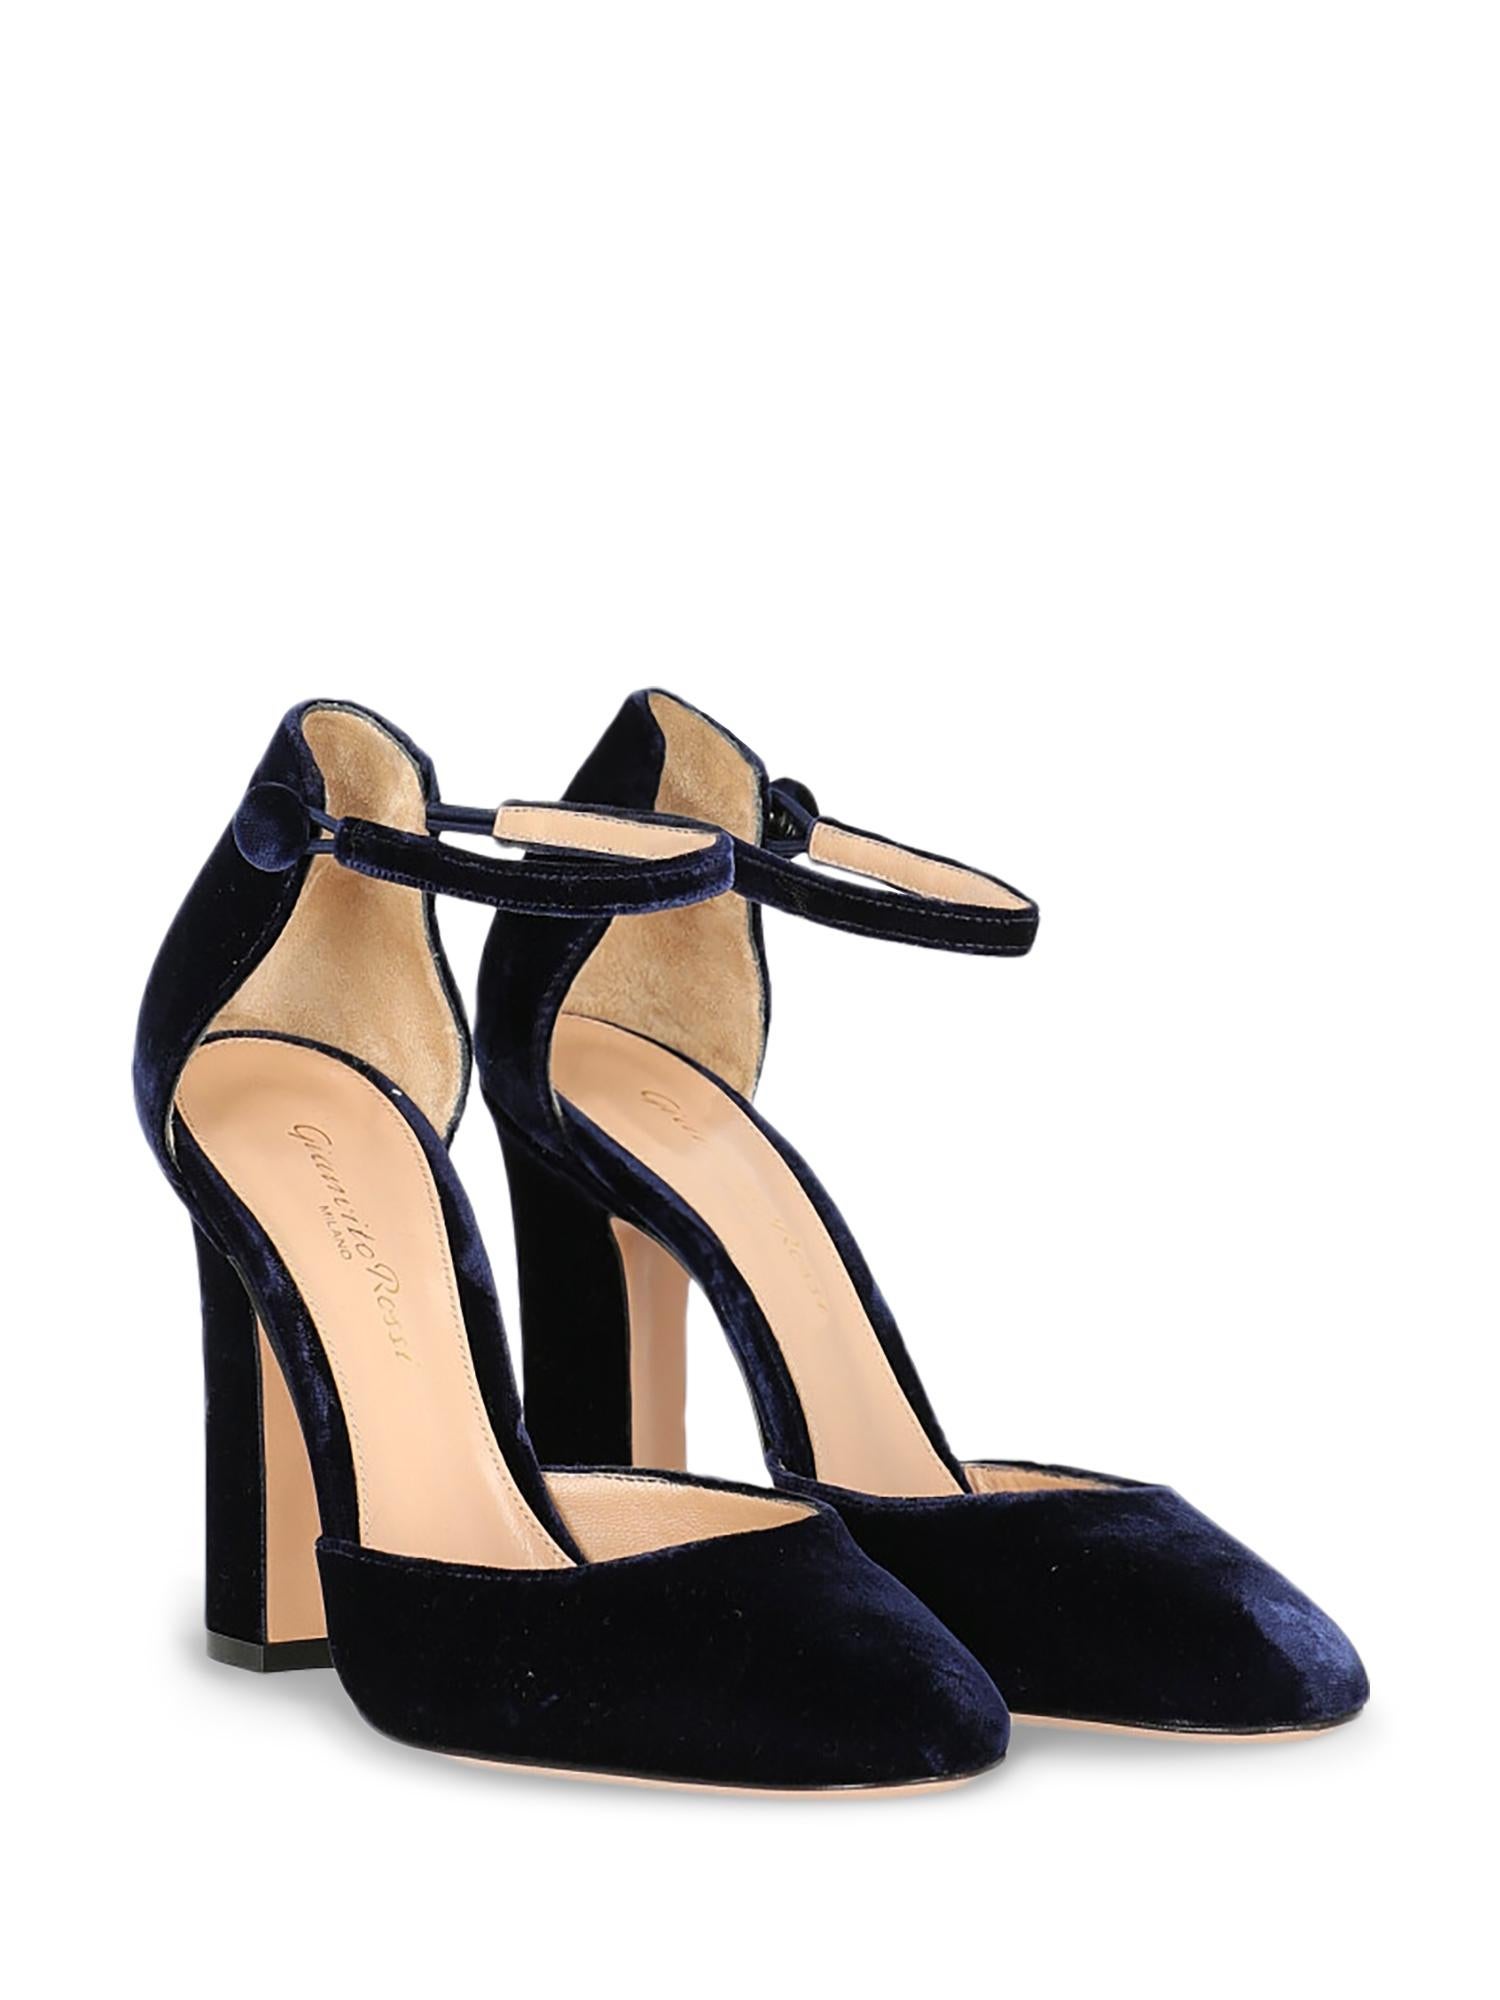 Pumps, fabric, solid color, velvet, botton fastening, round toe, branded insole, branded sole, tapered heel, high heel.

Product Condition: Excellent
Sole: negligible signs of use. Upper: negligible abrasions.

Measurements:
Heel height: 10